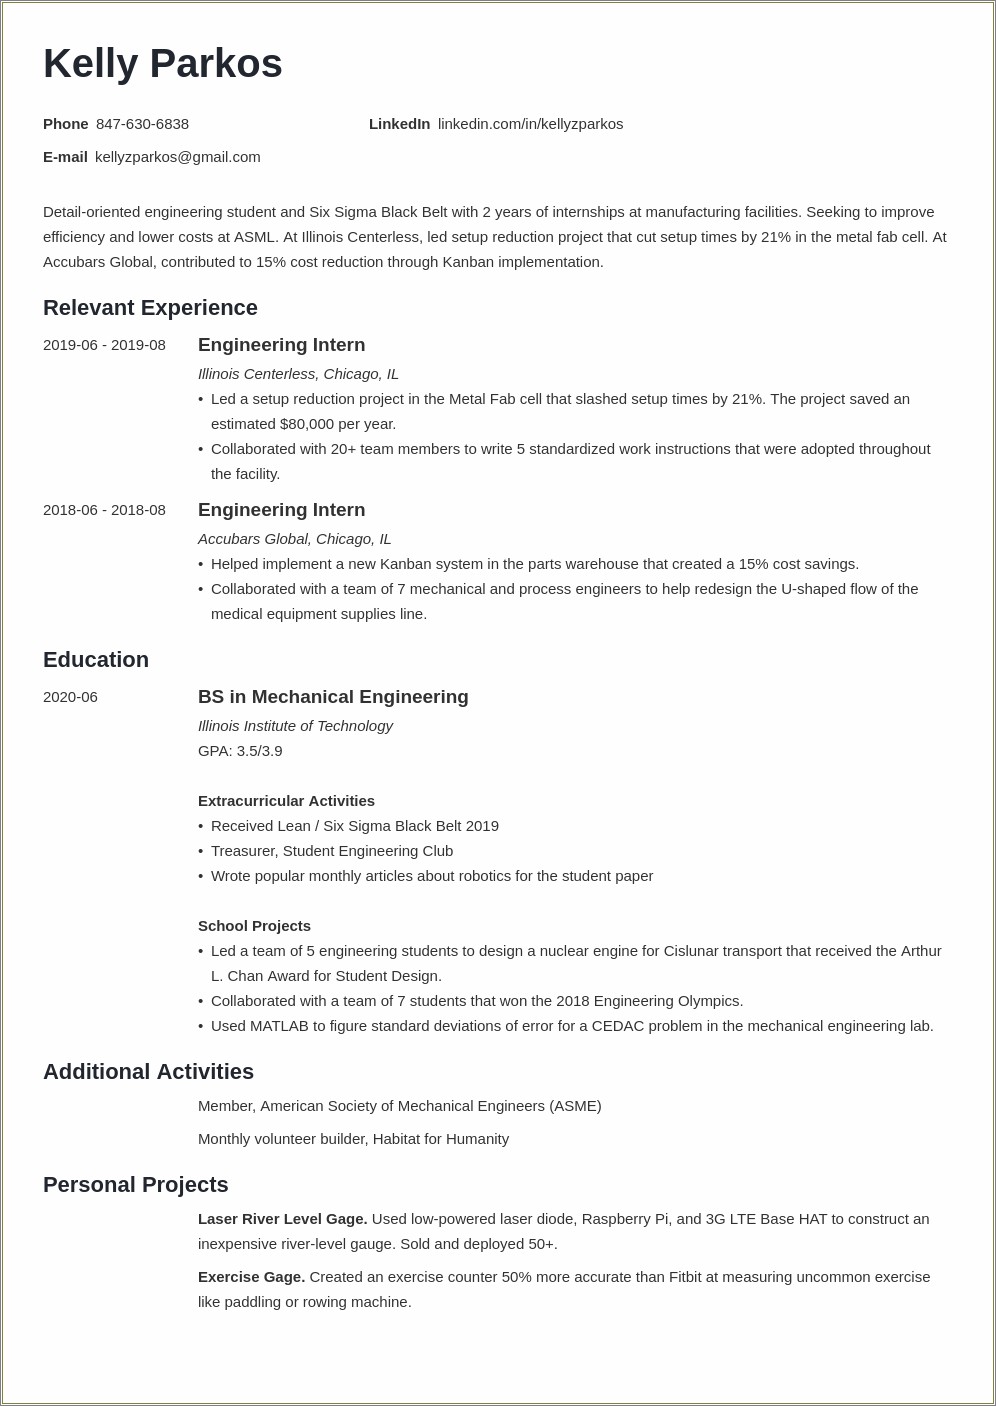 Example Resume With Six Sigma Green Belt